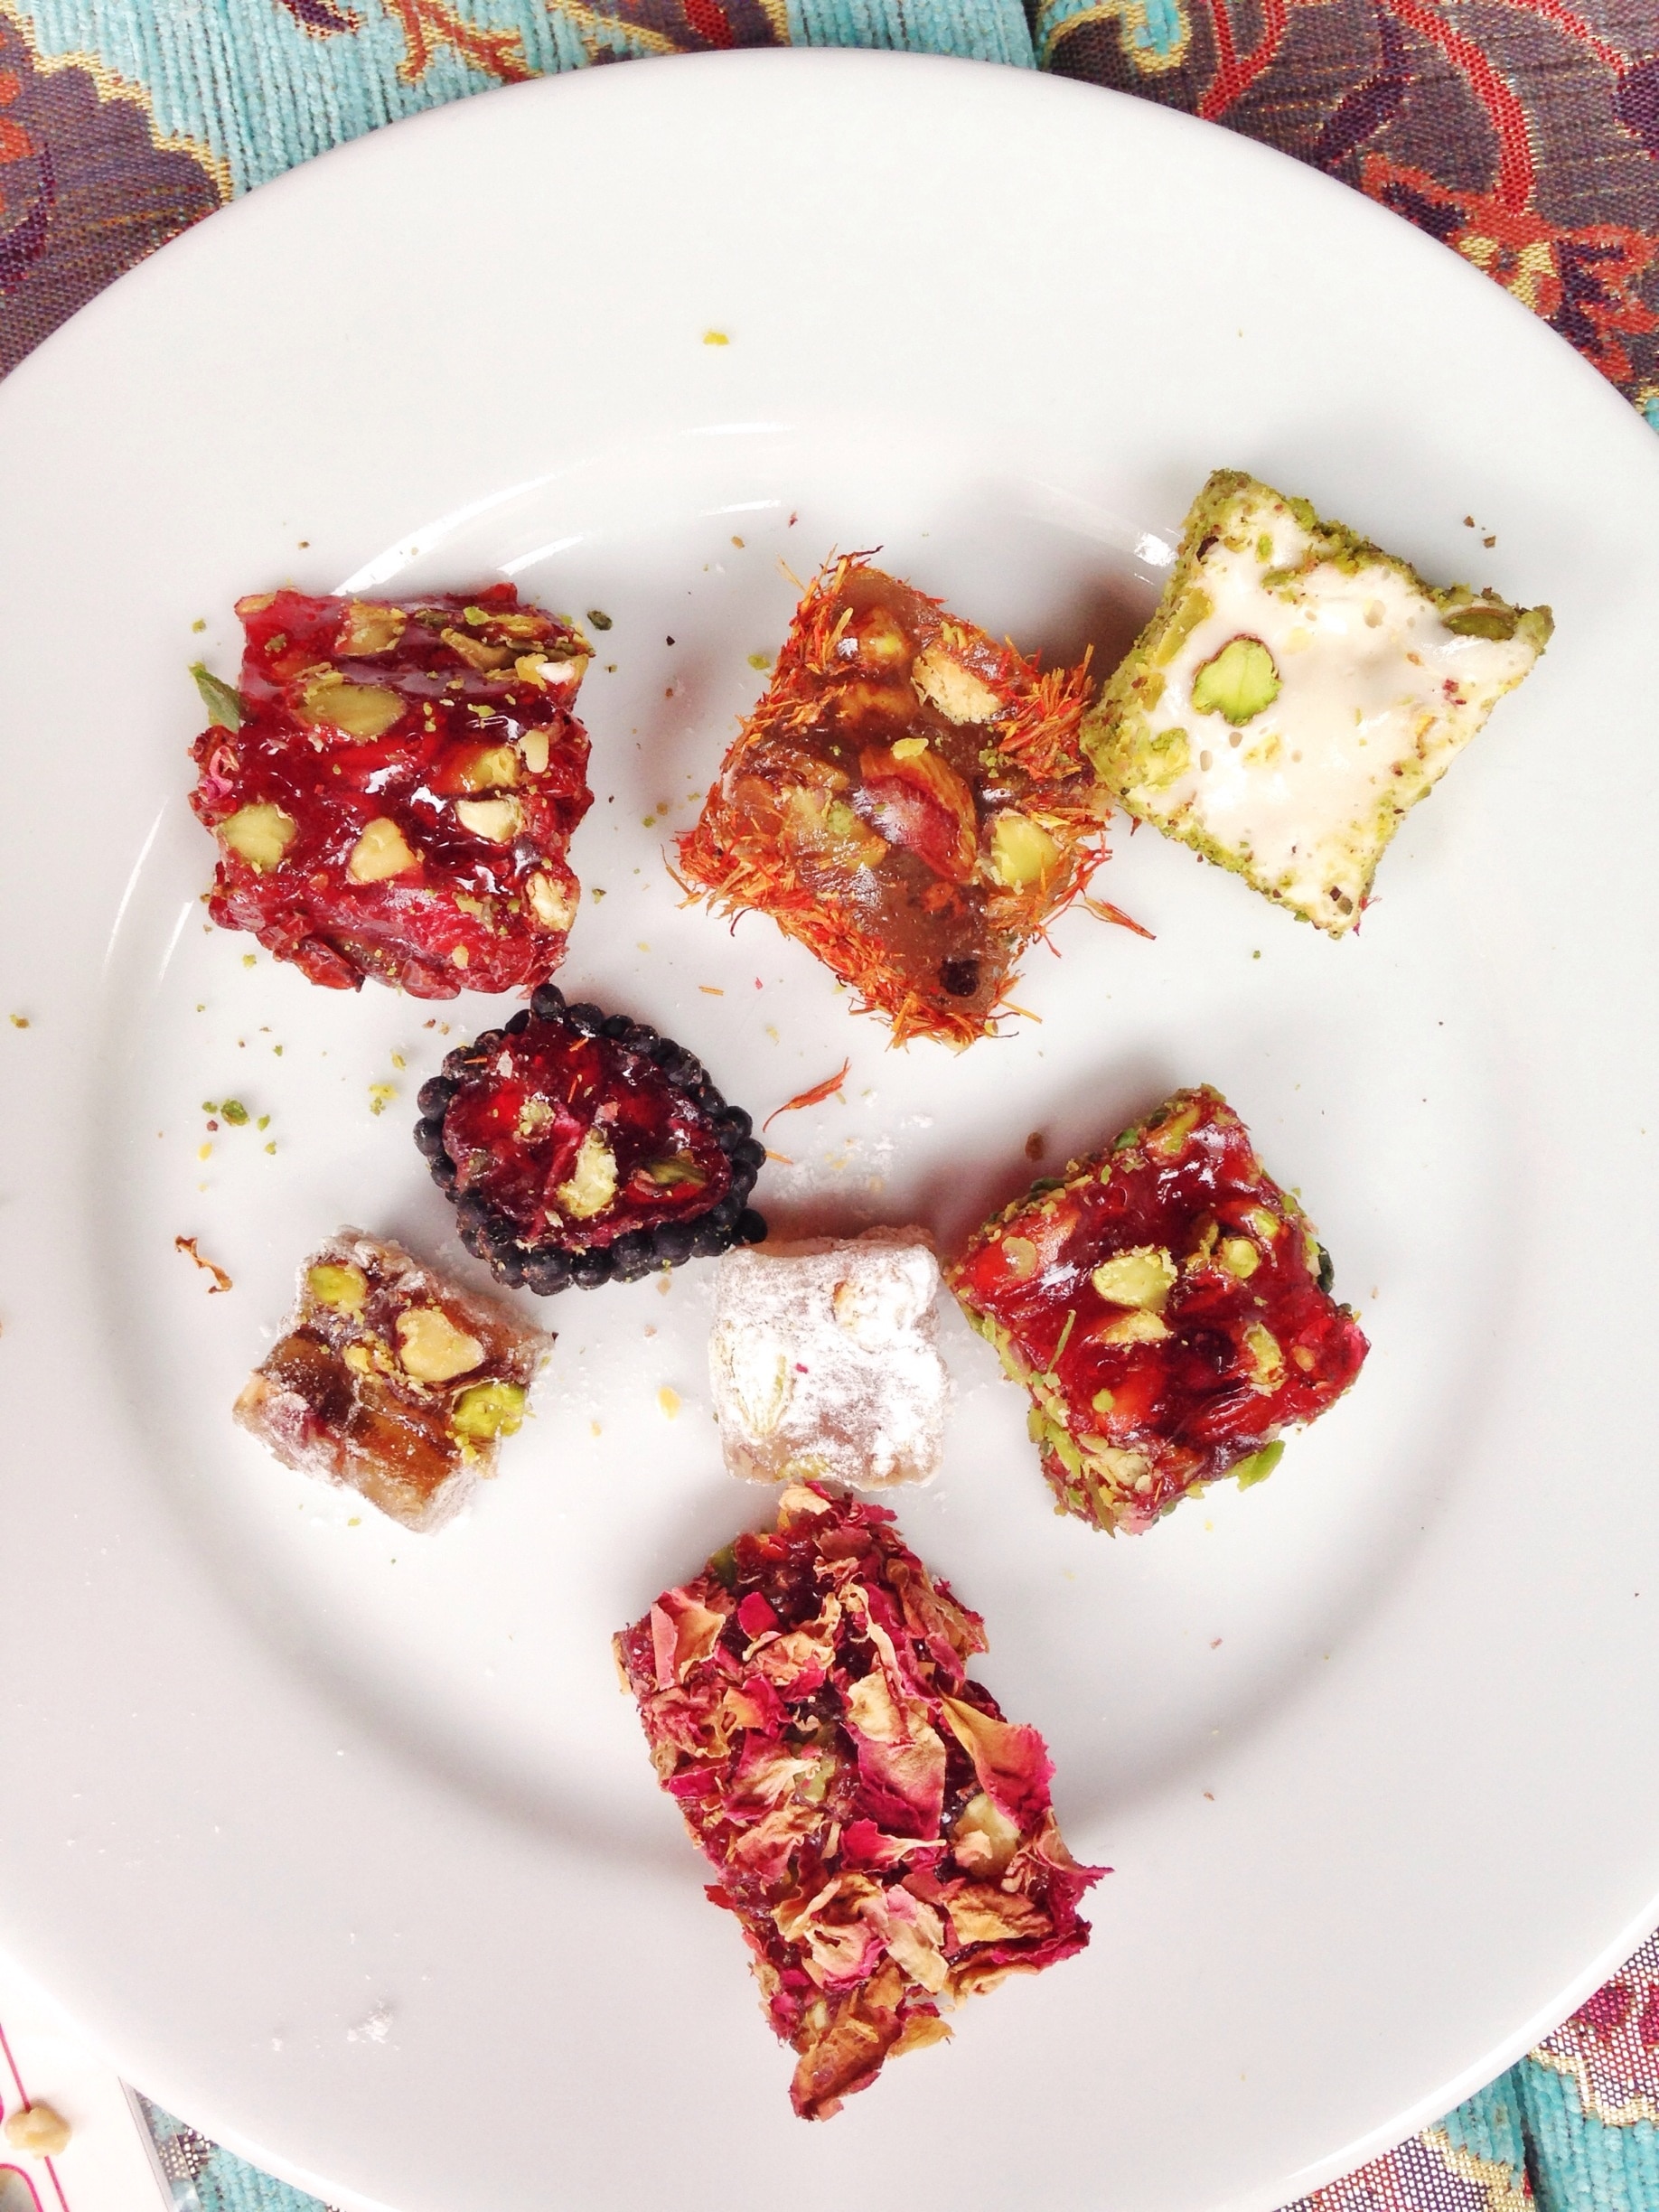 There is no shortage in variety when it comes to Turkish delight in Istanbul. Chocolate, pistachio, coconut, and rose petal are among the many favors you can find while wandering Turkey's busy streets. And I highly suggest you try each and every one of them.